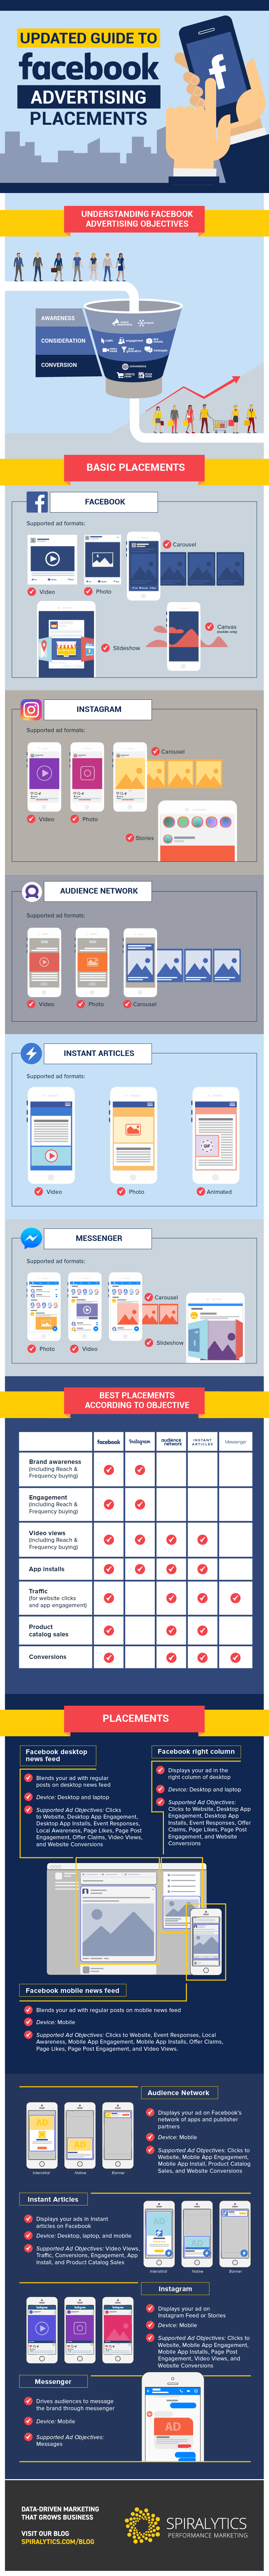 Updated Guide to Facebook Advertising Placements - #infographic